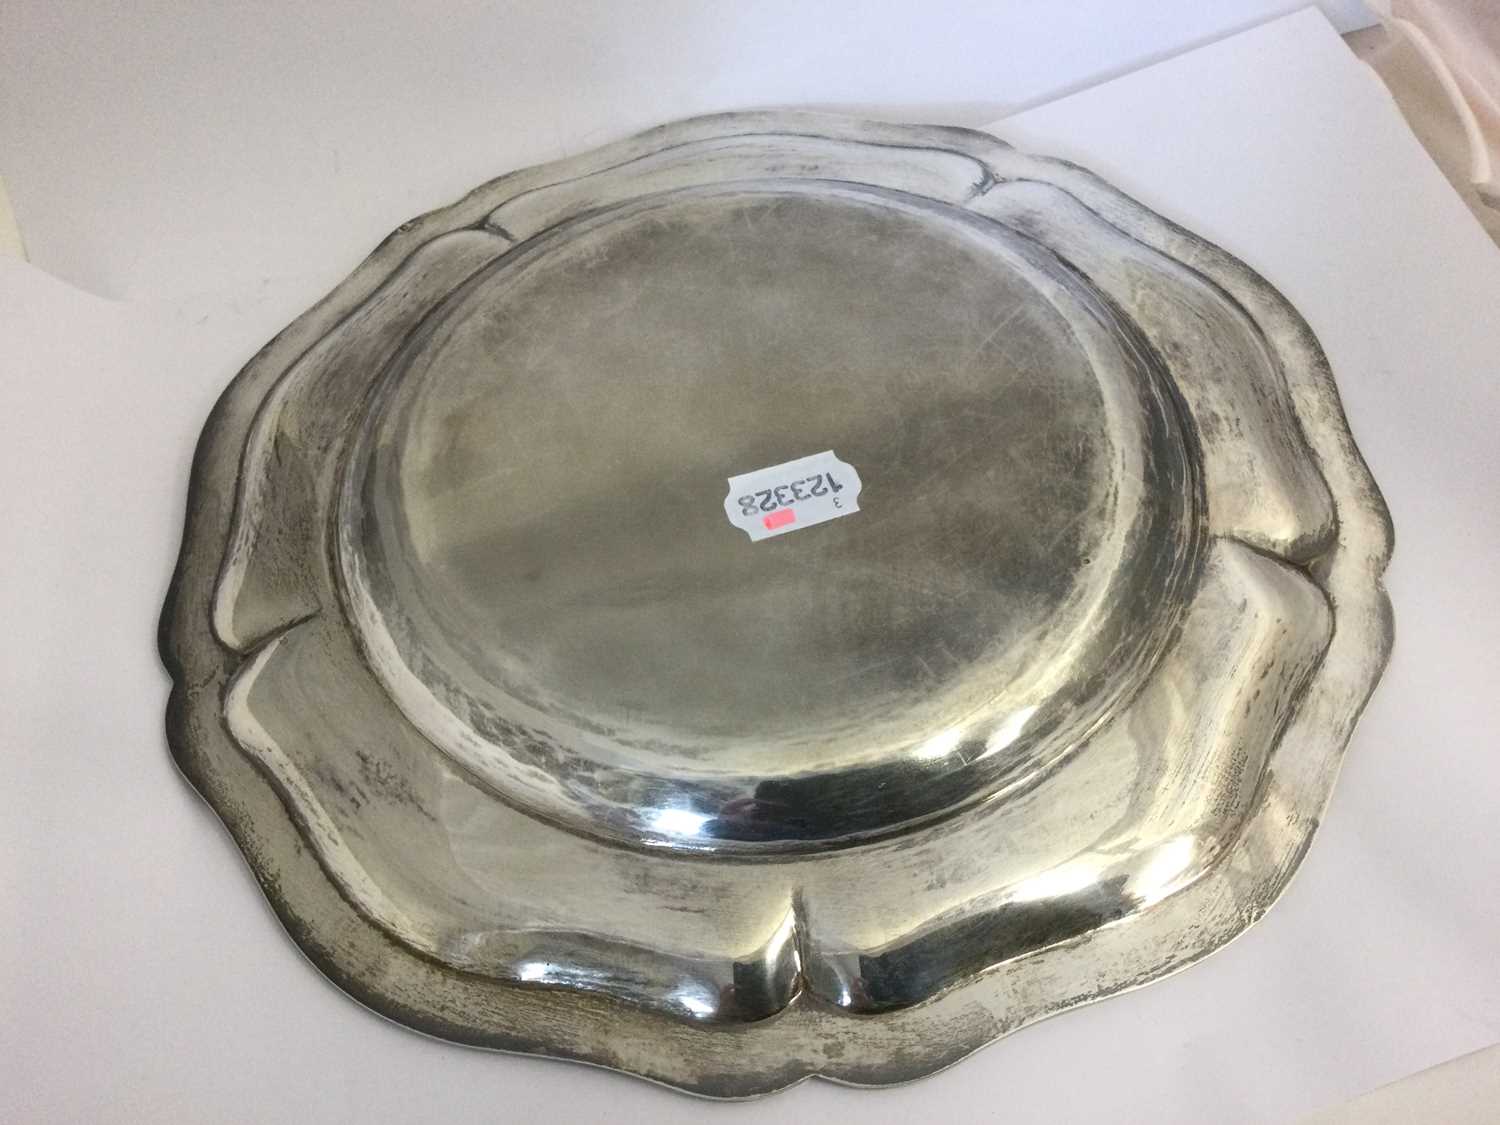 A French Silver Second-Course Dish, Maker's Mark GLJ, Early 20th Century - Image 7 of 8